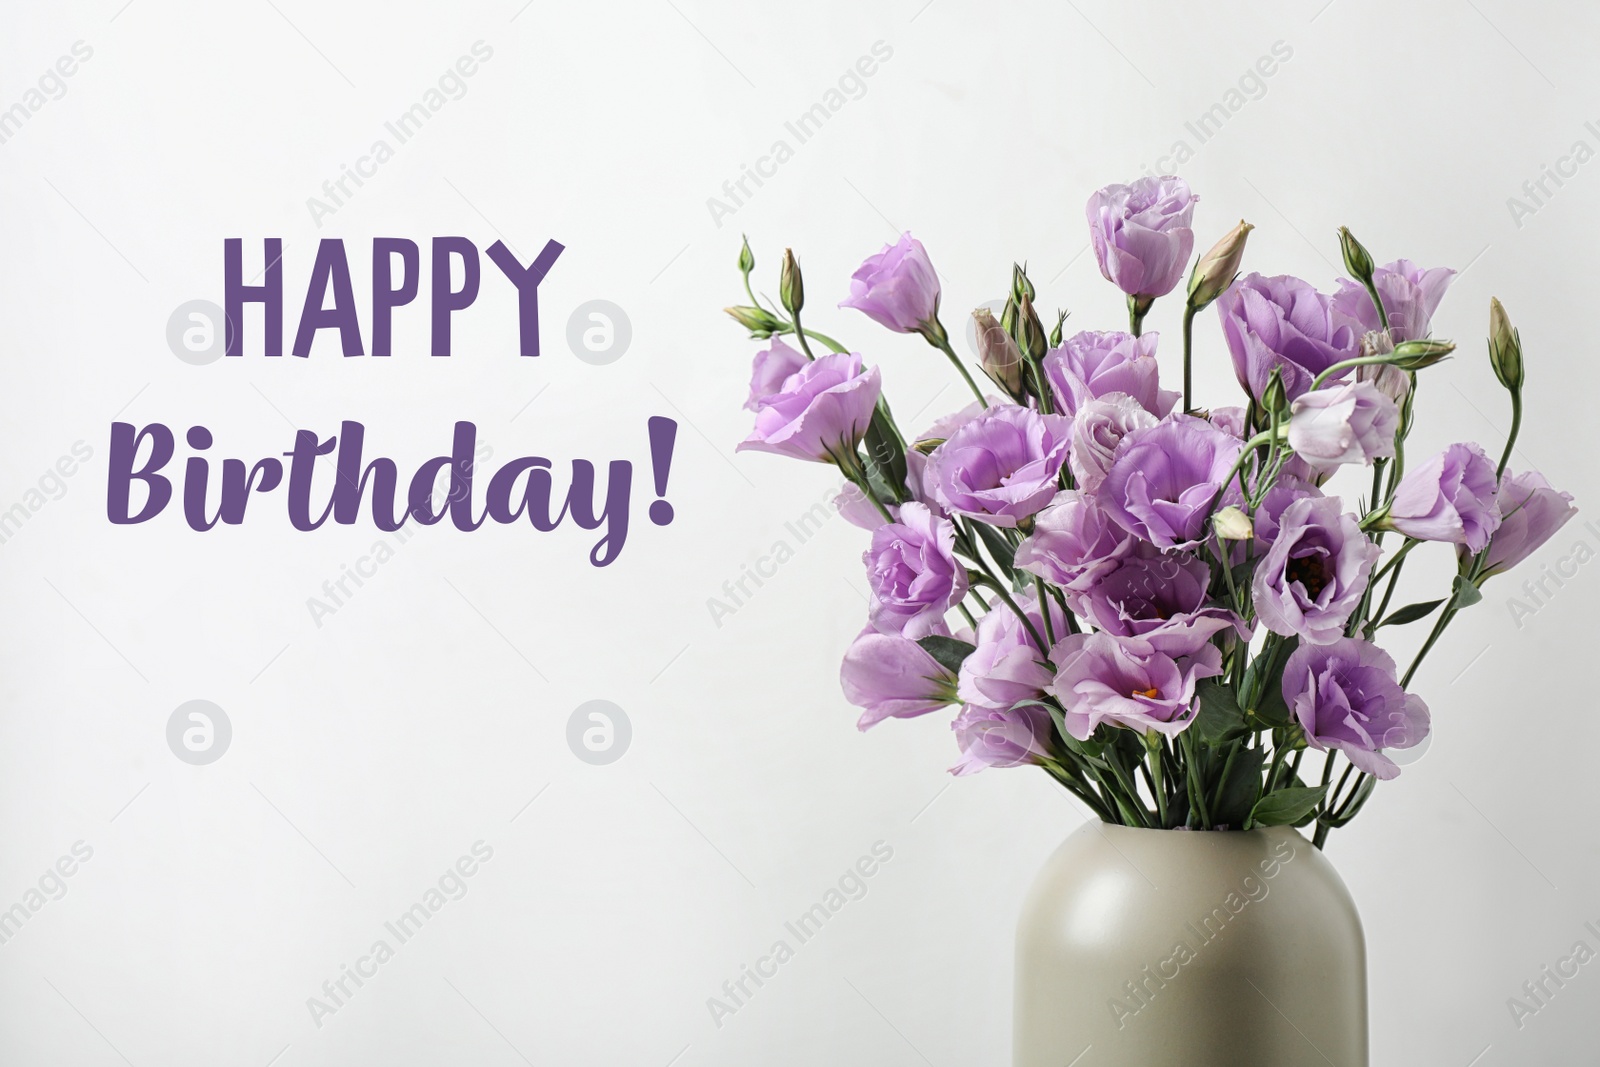 Image of Happy Birthday! Beautiful violet flowers in vase on light background